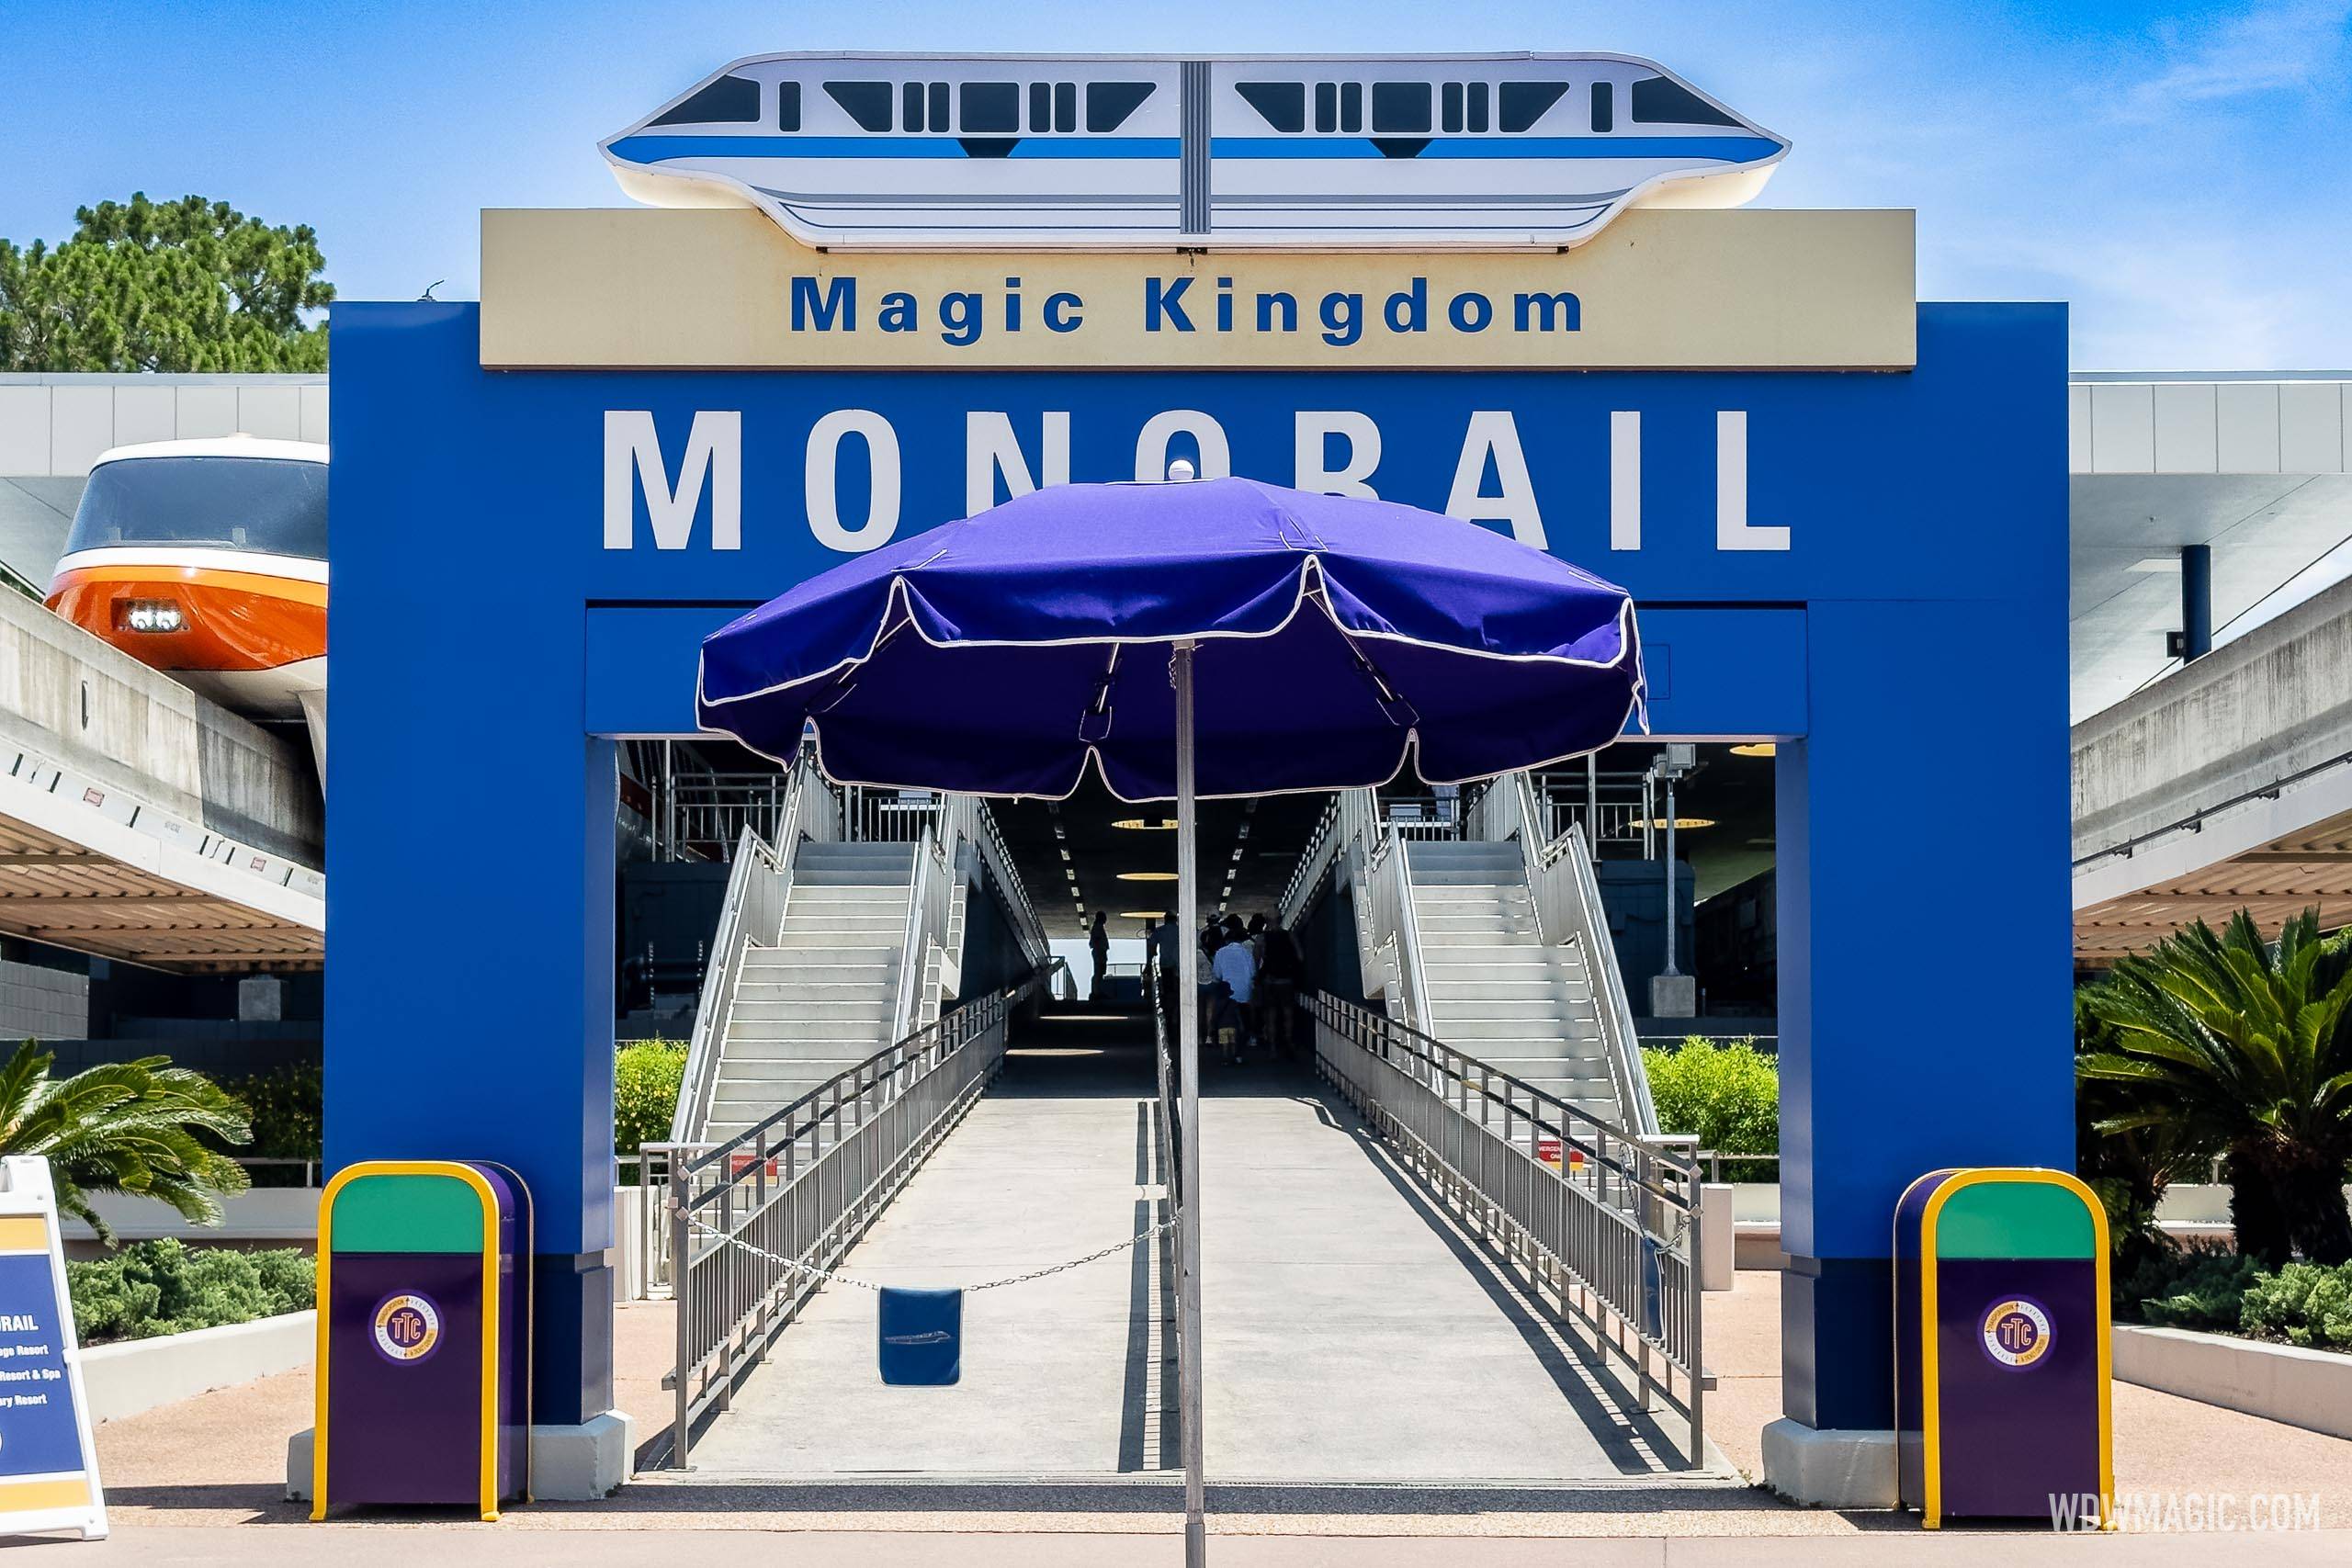 Walt Disney World Monorail gets an upgraded sign at TTC, including undercarriage lighting effect